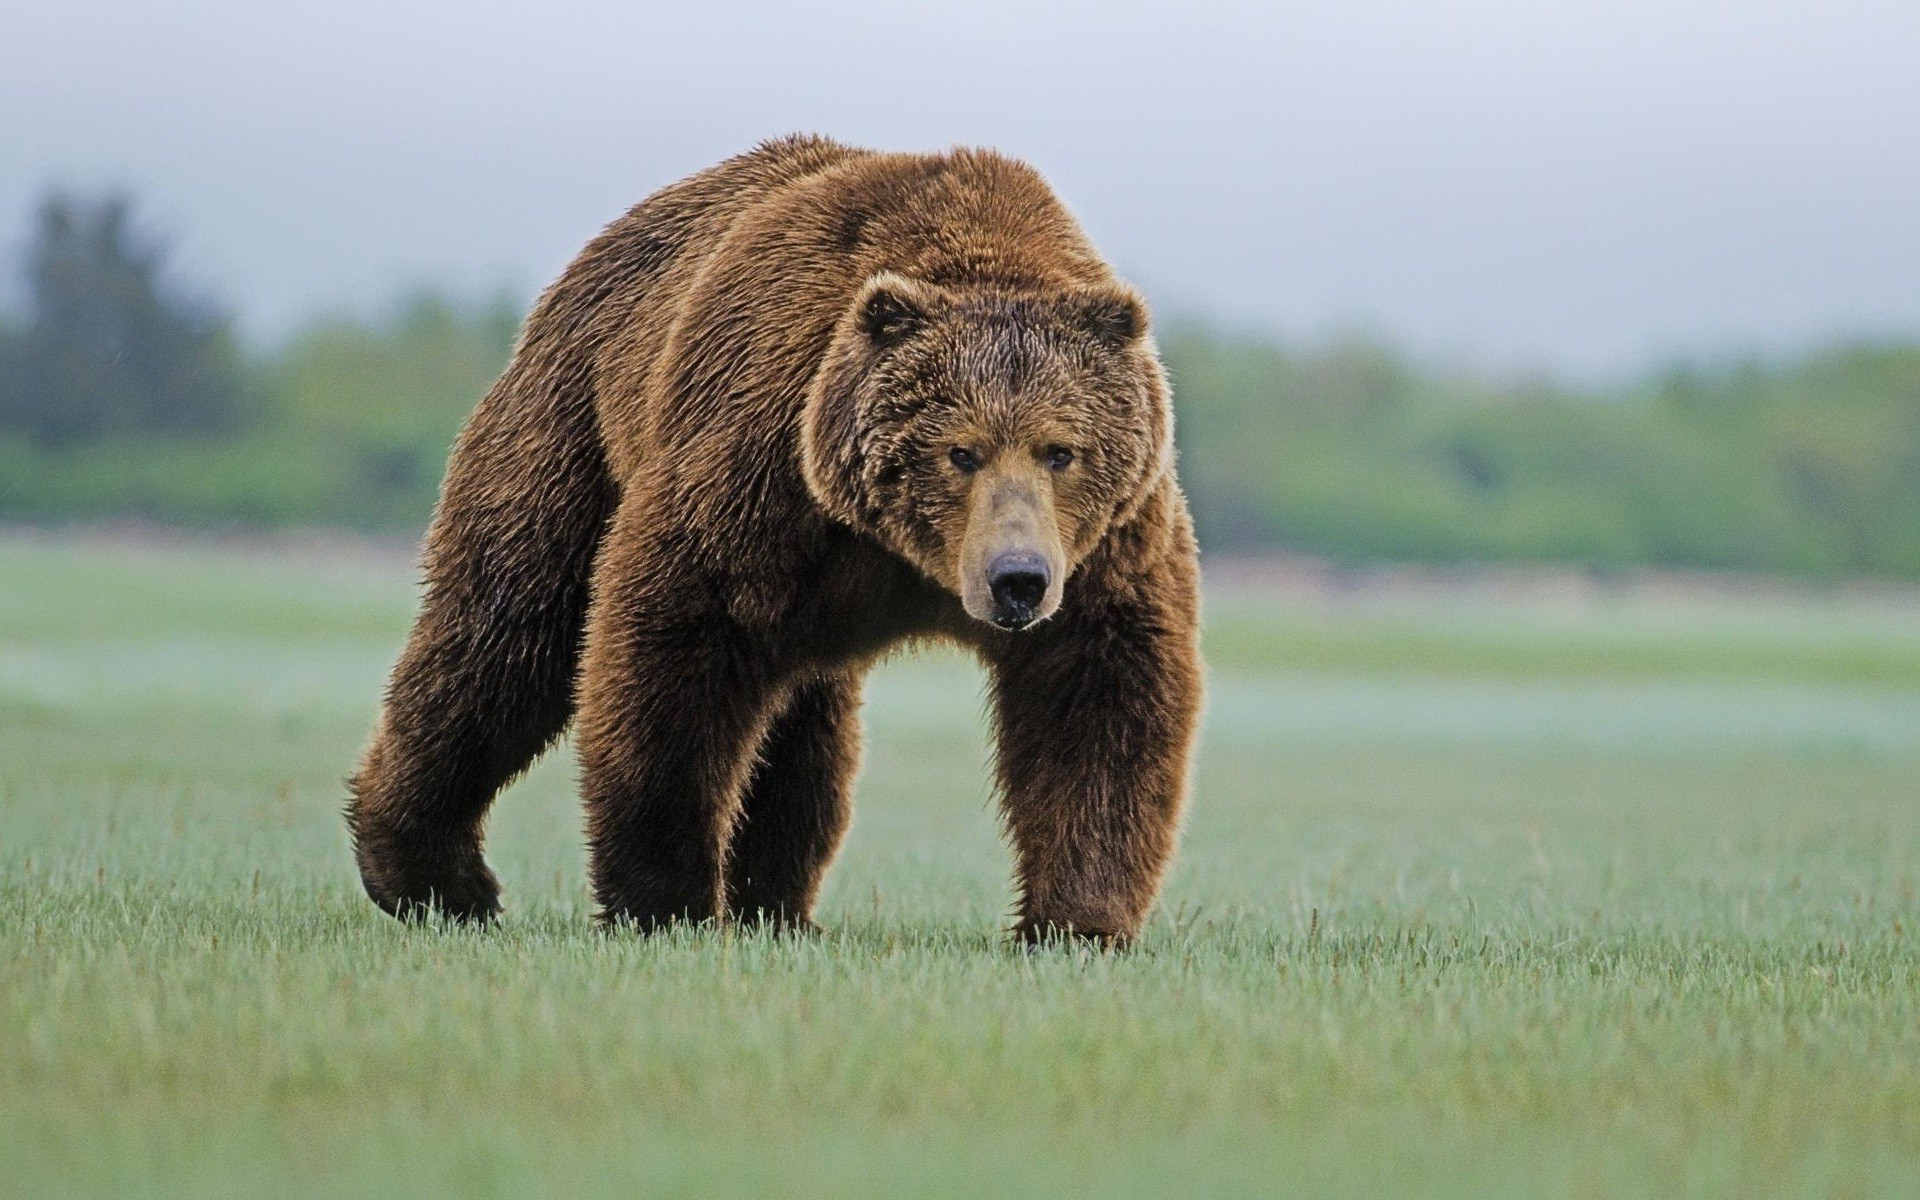 bears-nature-animals-grizzly-bear-grizzly-bears-wallpapers-hd